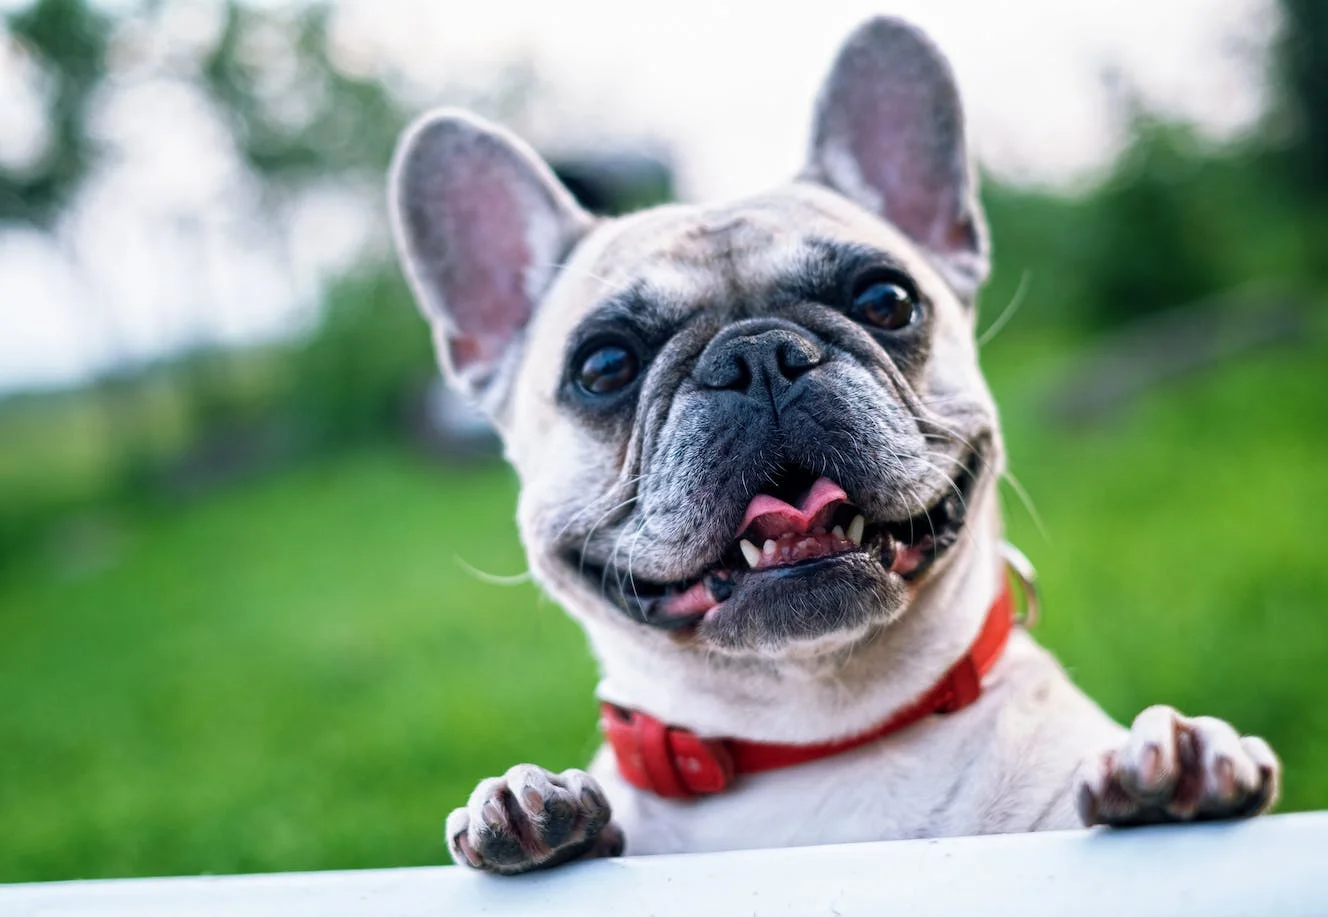 Dog photo : a photography of a happy French bulldog, wearing a red collar, standing with both front paws resting on a white ledge. Rather green country blurred background, with a white sky.